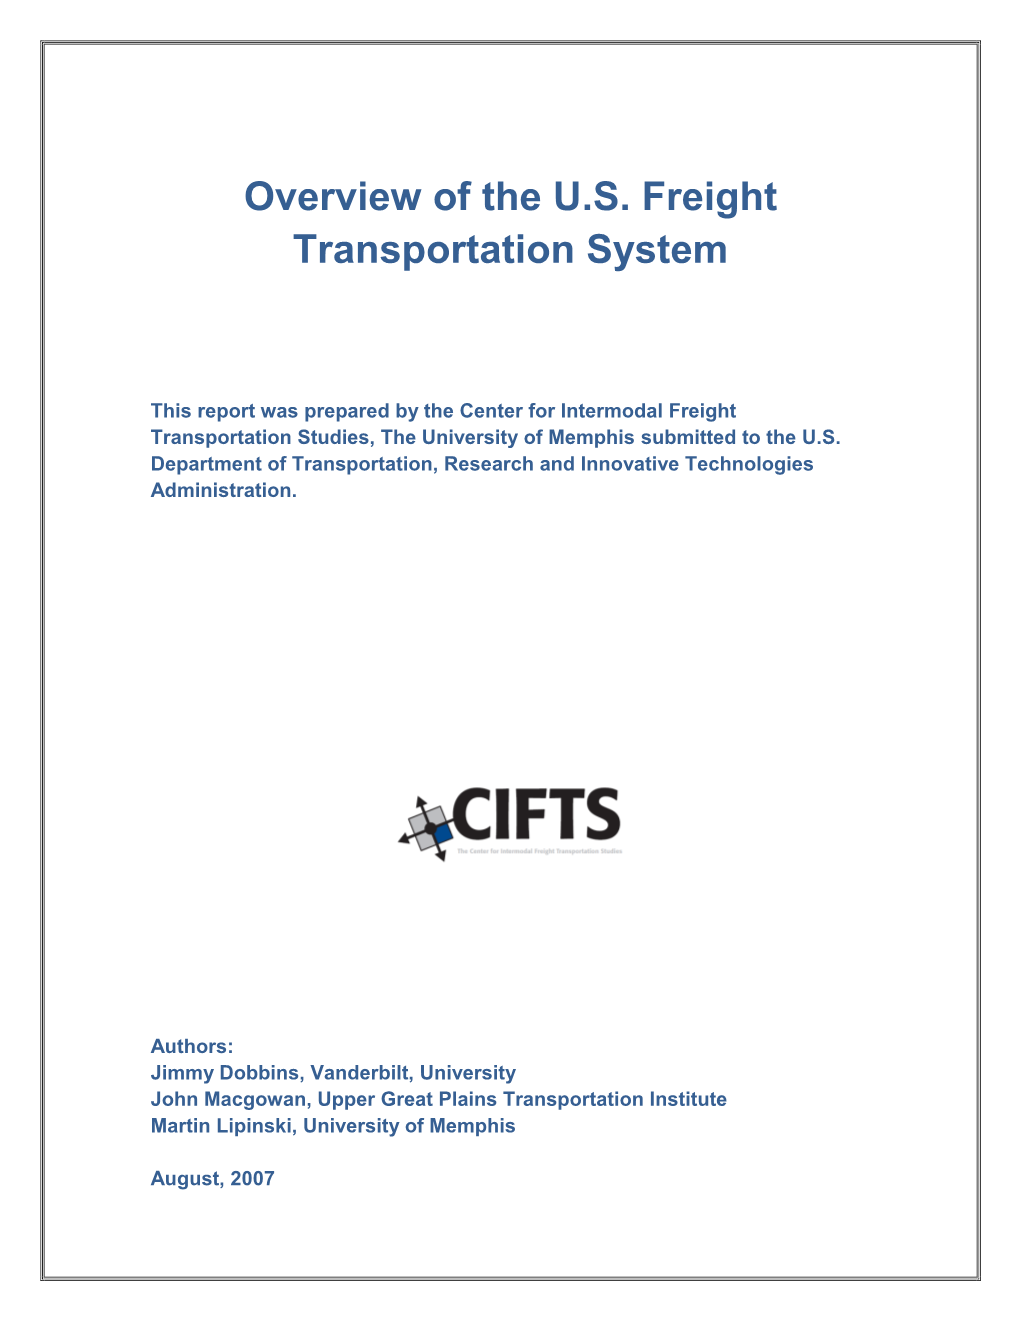 Overview of the U.S. Freight Transportation System